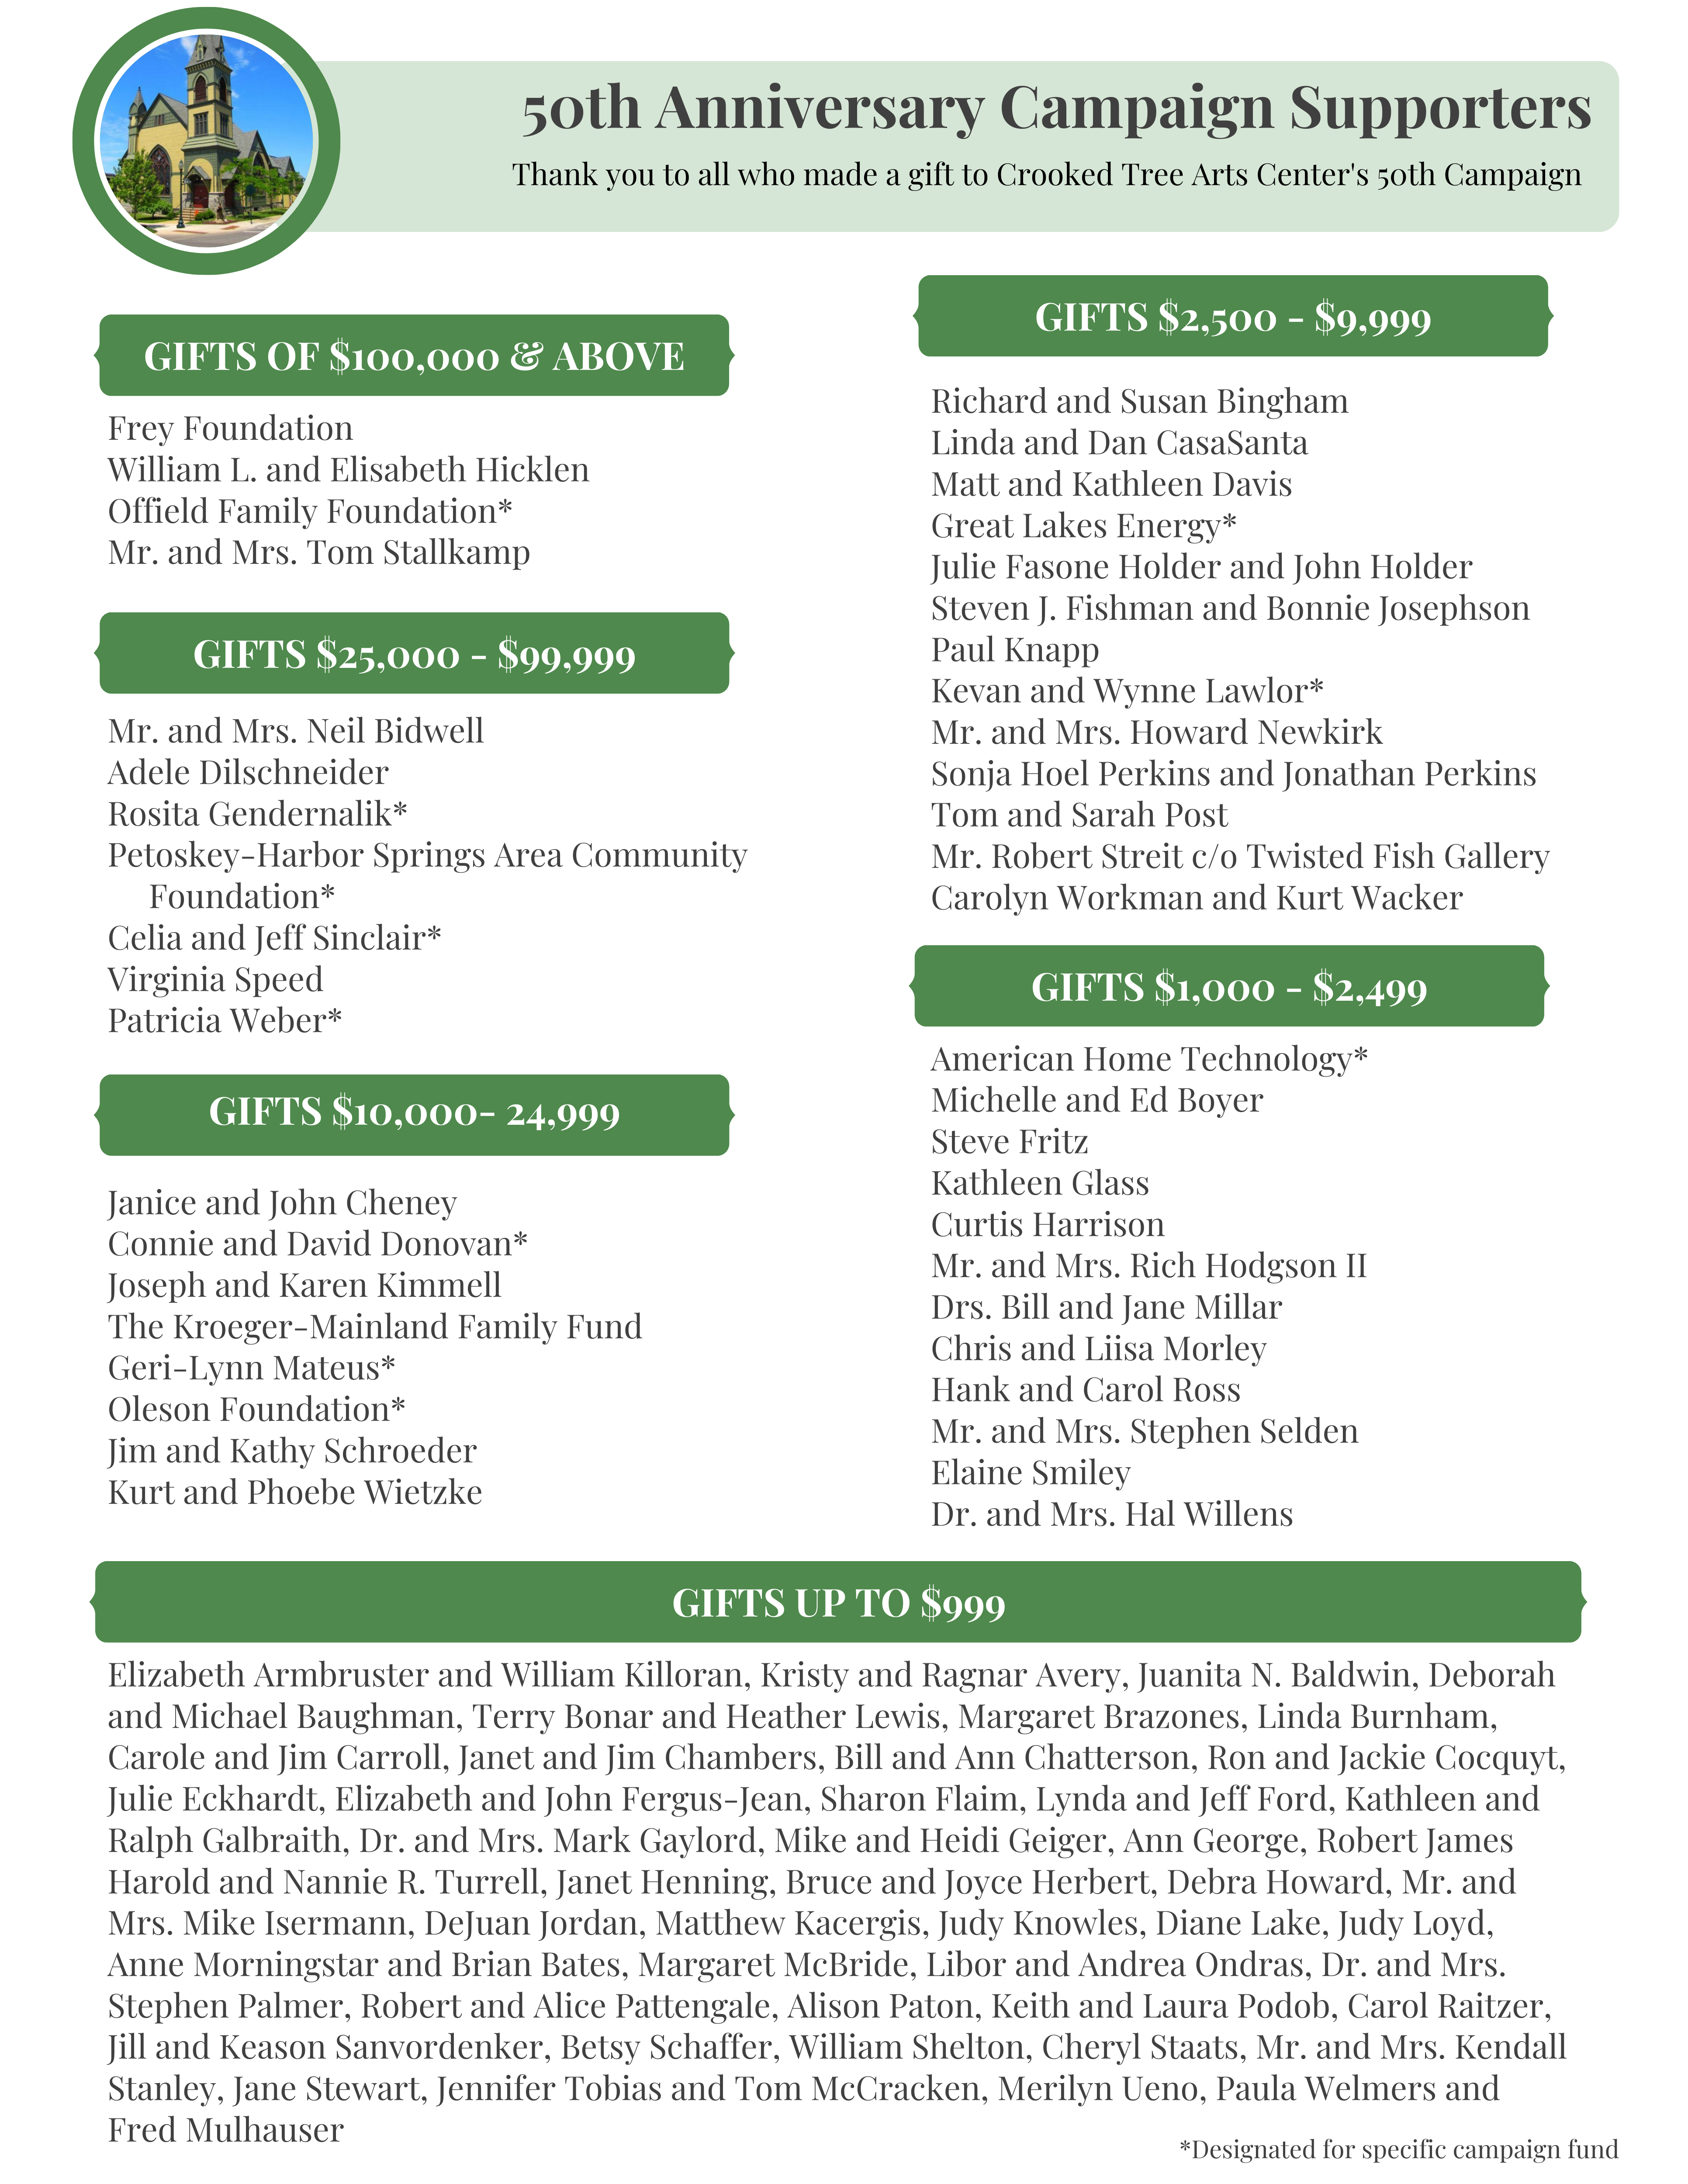 List of CTAC 50th Anniversary Supporters